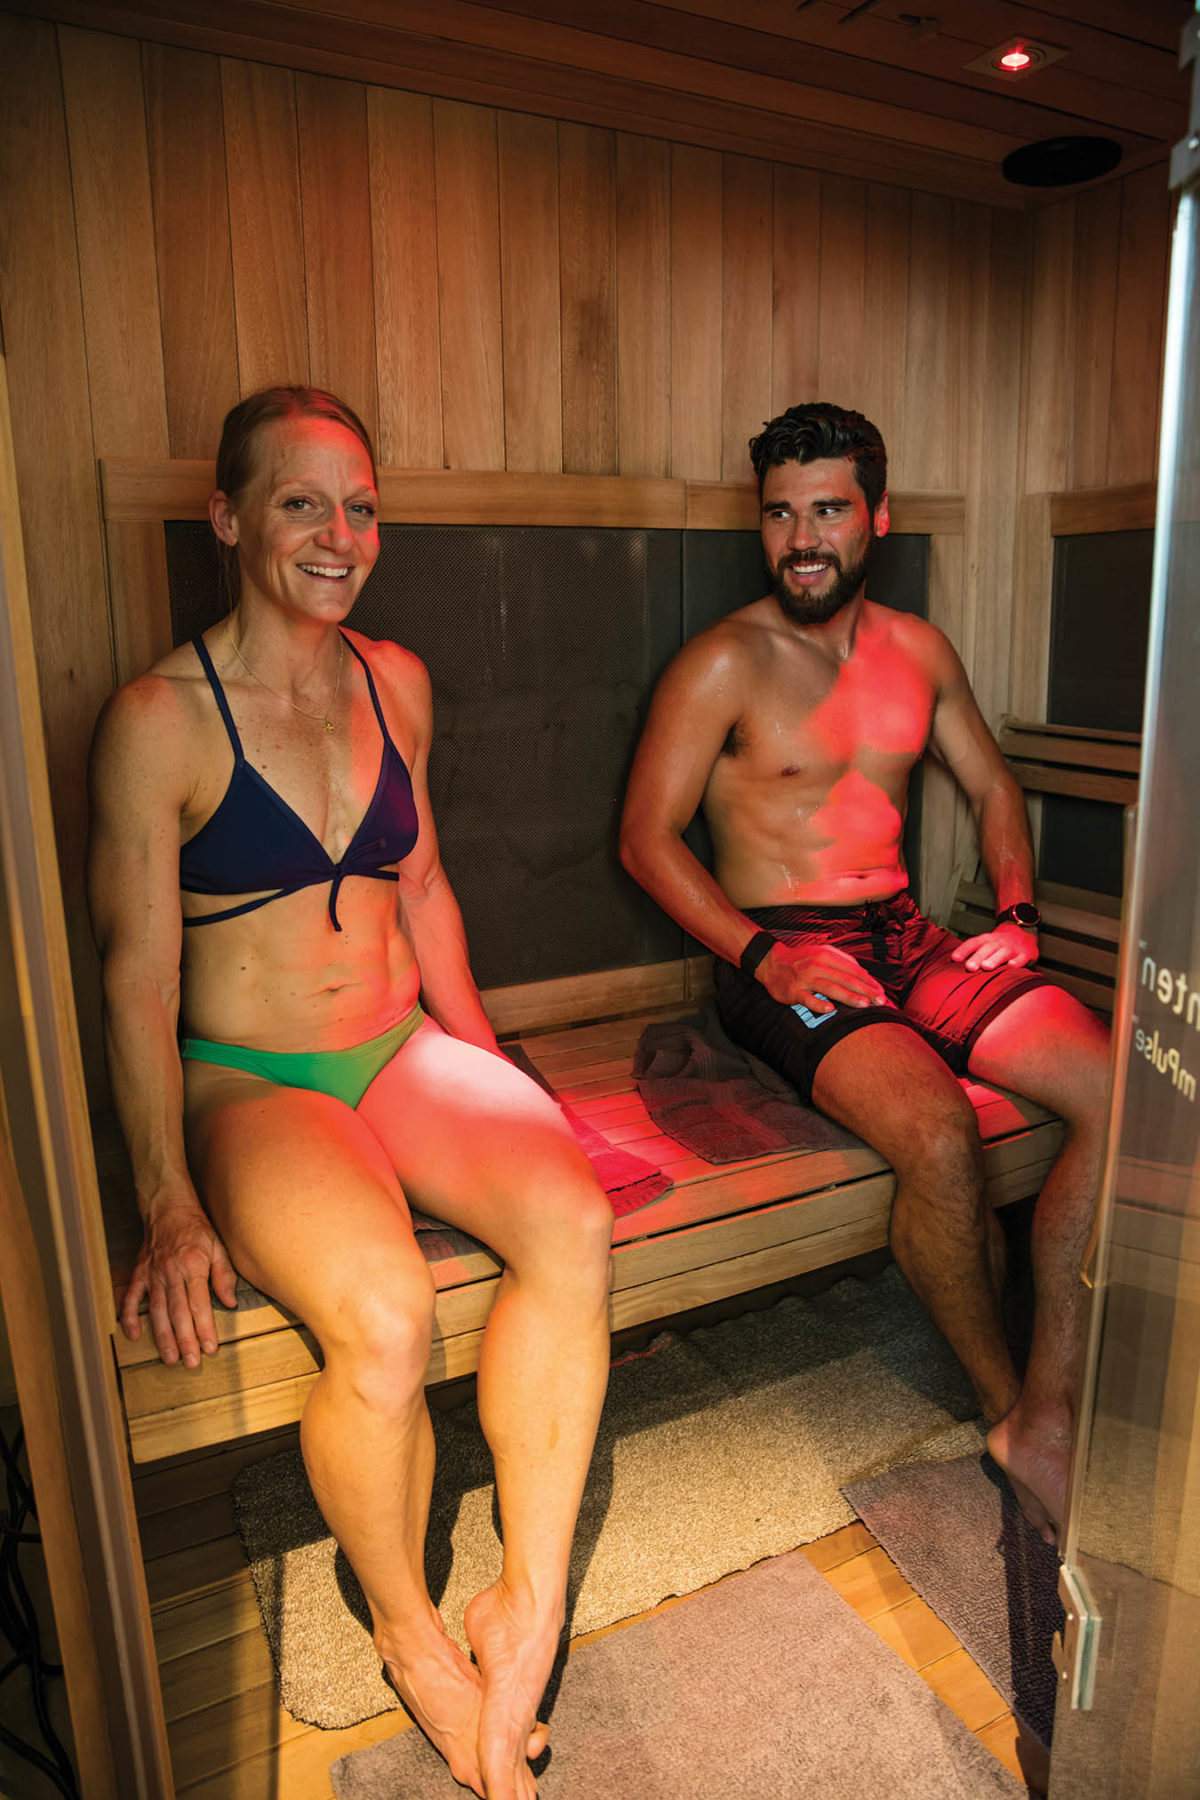 A man and woman sitting in a sauna.